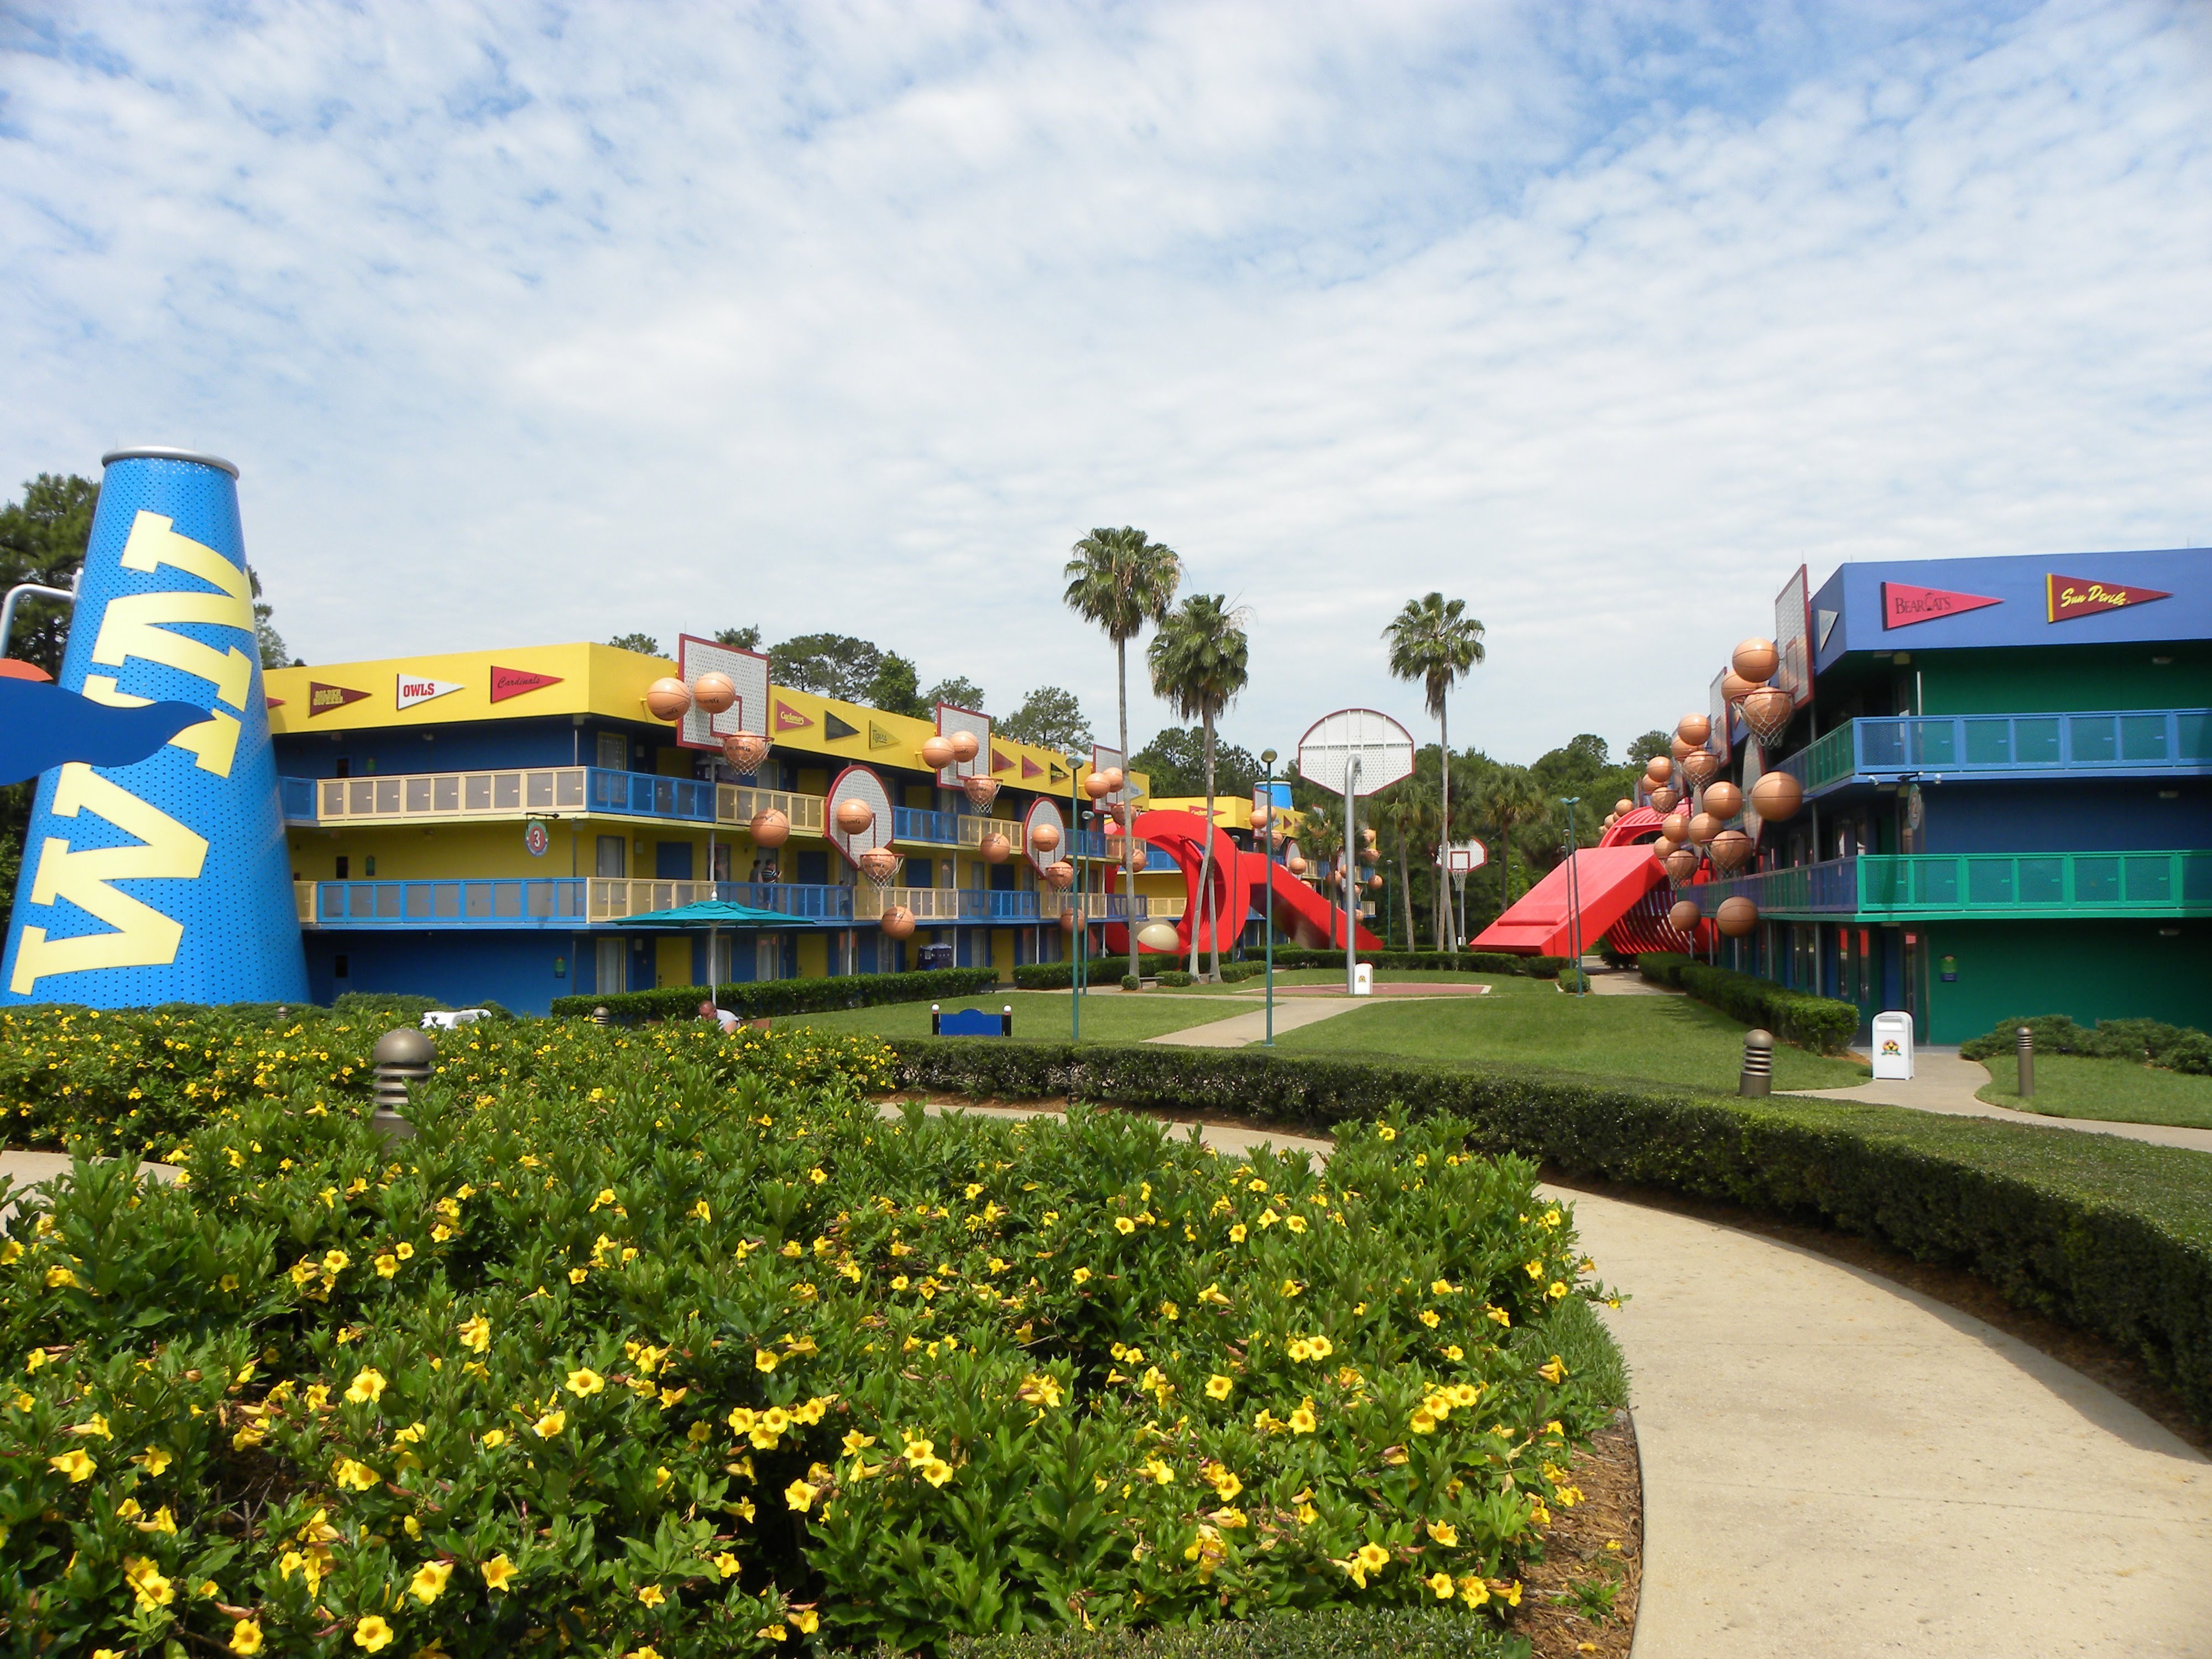 How much do value resorts cost at Disneyworld